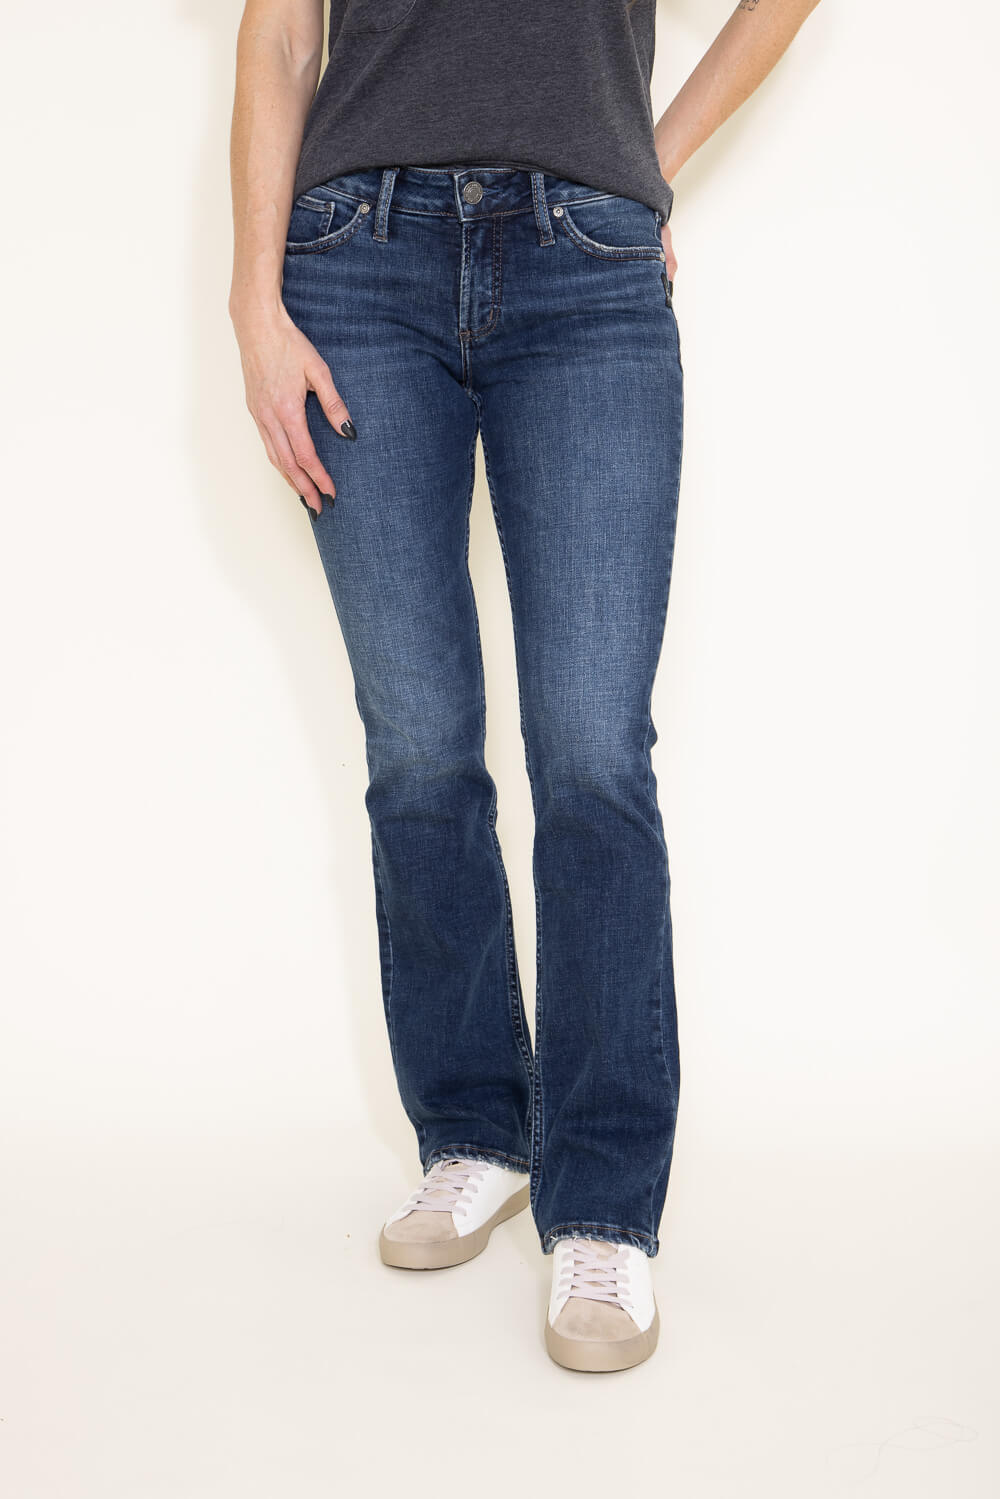 Bootcut jeans for girls, Slim bootcut jeans women's, Bootcut jeans for  short girl